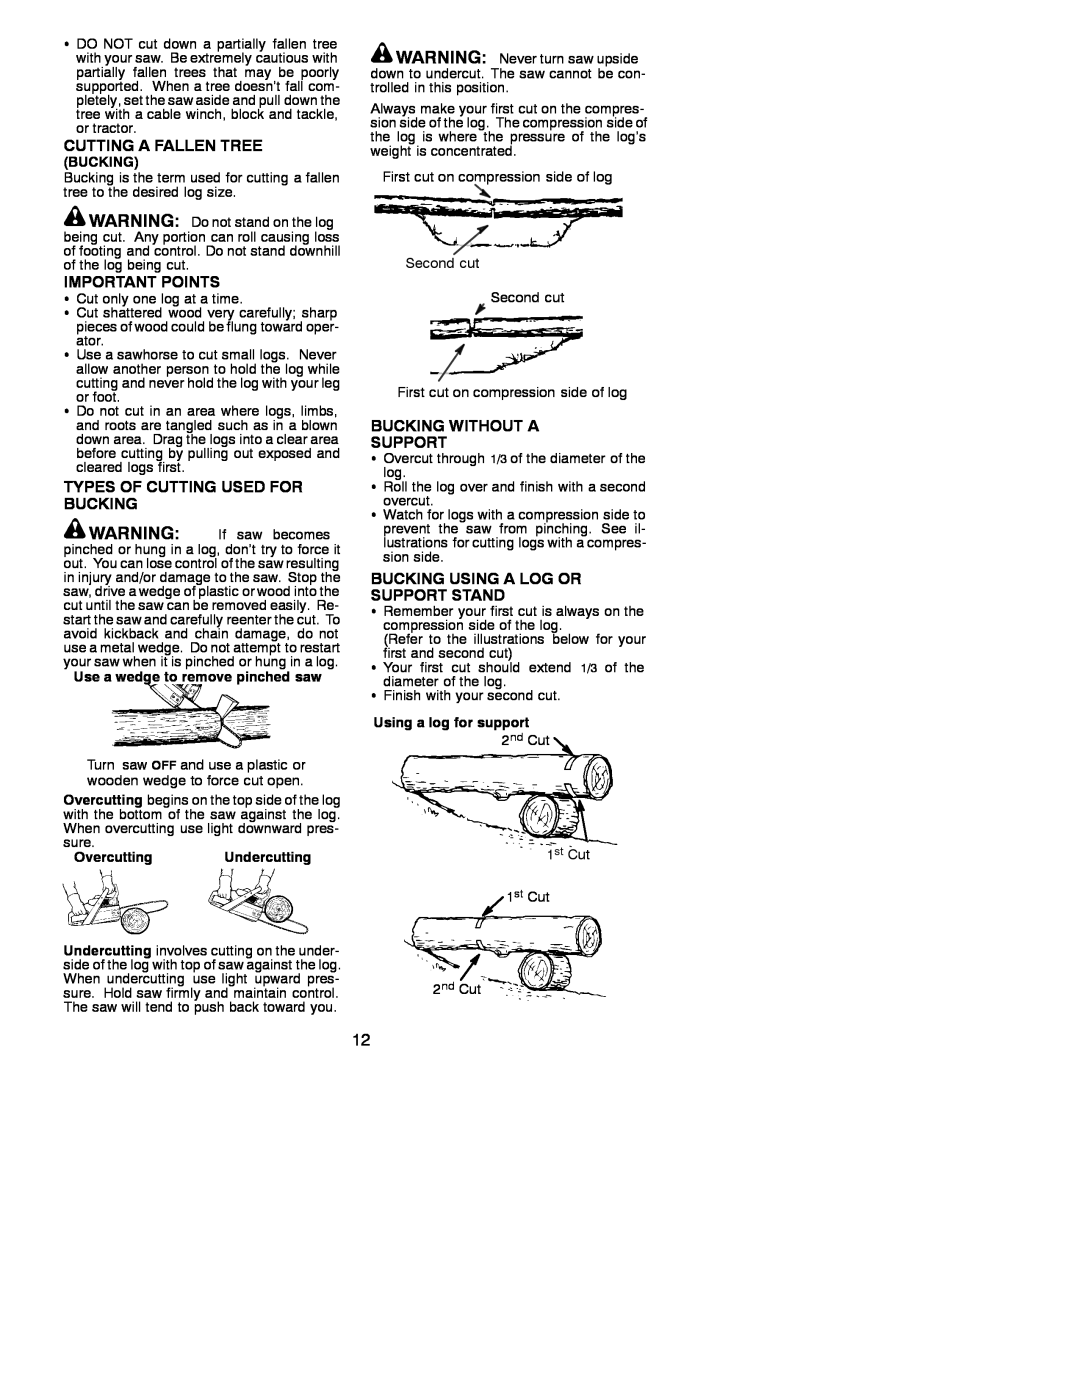 Poulan 2001-07 Cutting A Fallen Tree, Important Points, Types Of Cutting Used For Bucking, Bucking Without A Support 